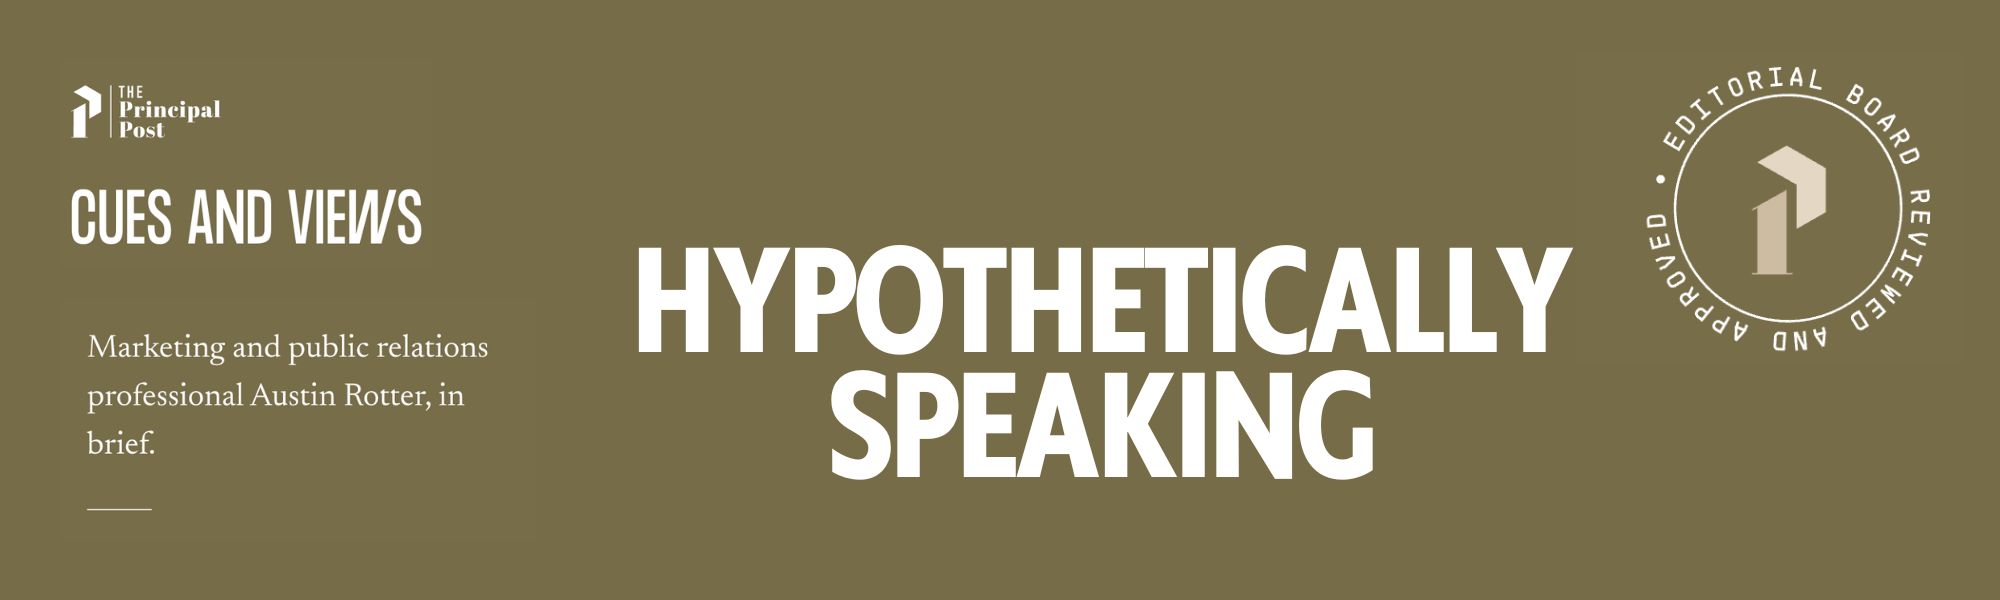 Austin Rotter Interview | Hypothetically Speaking